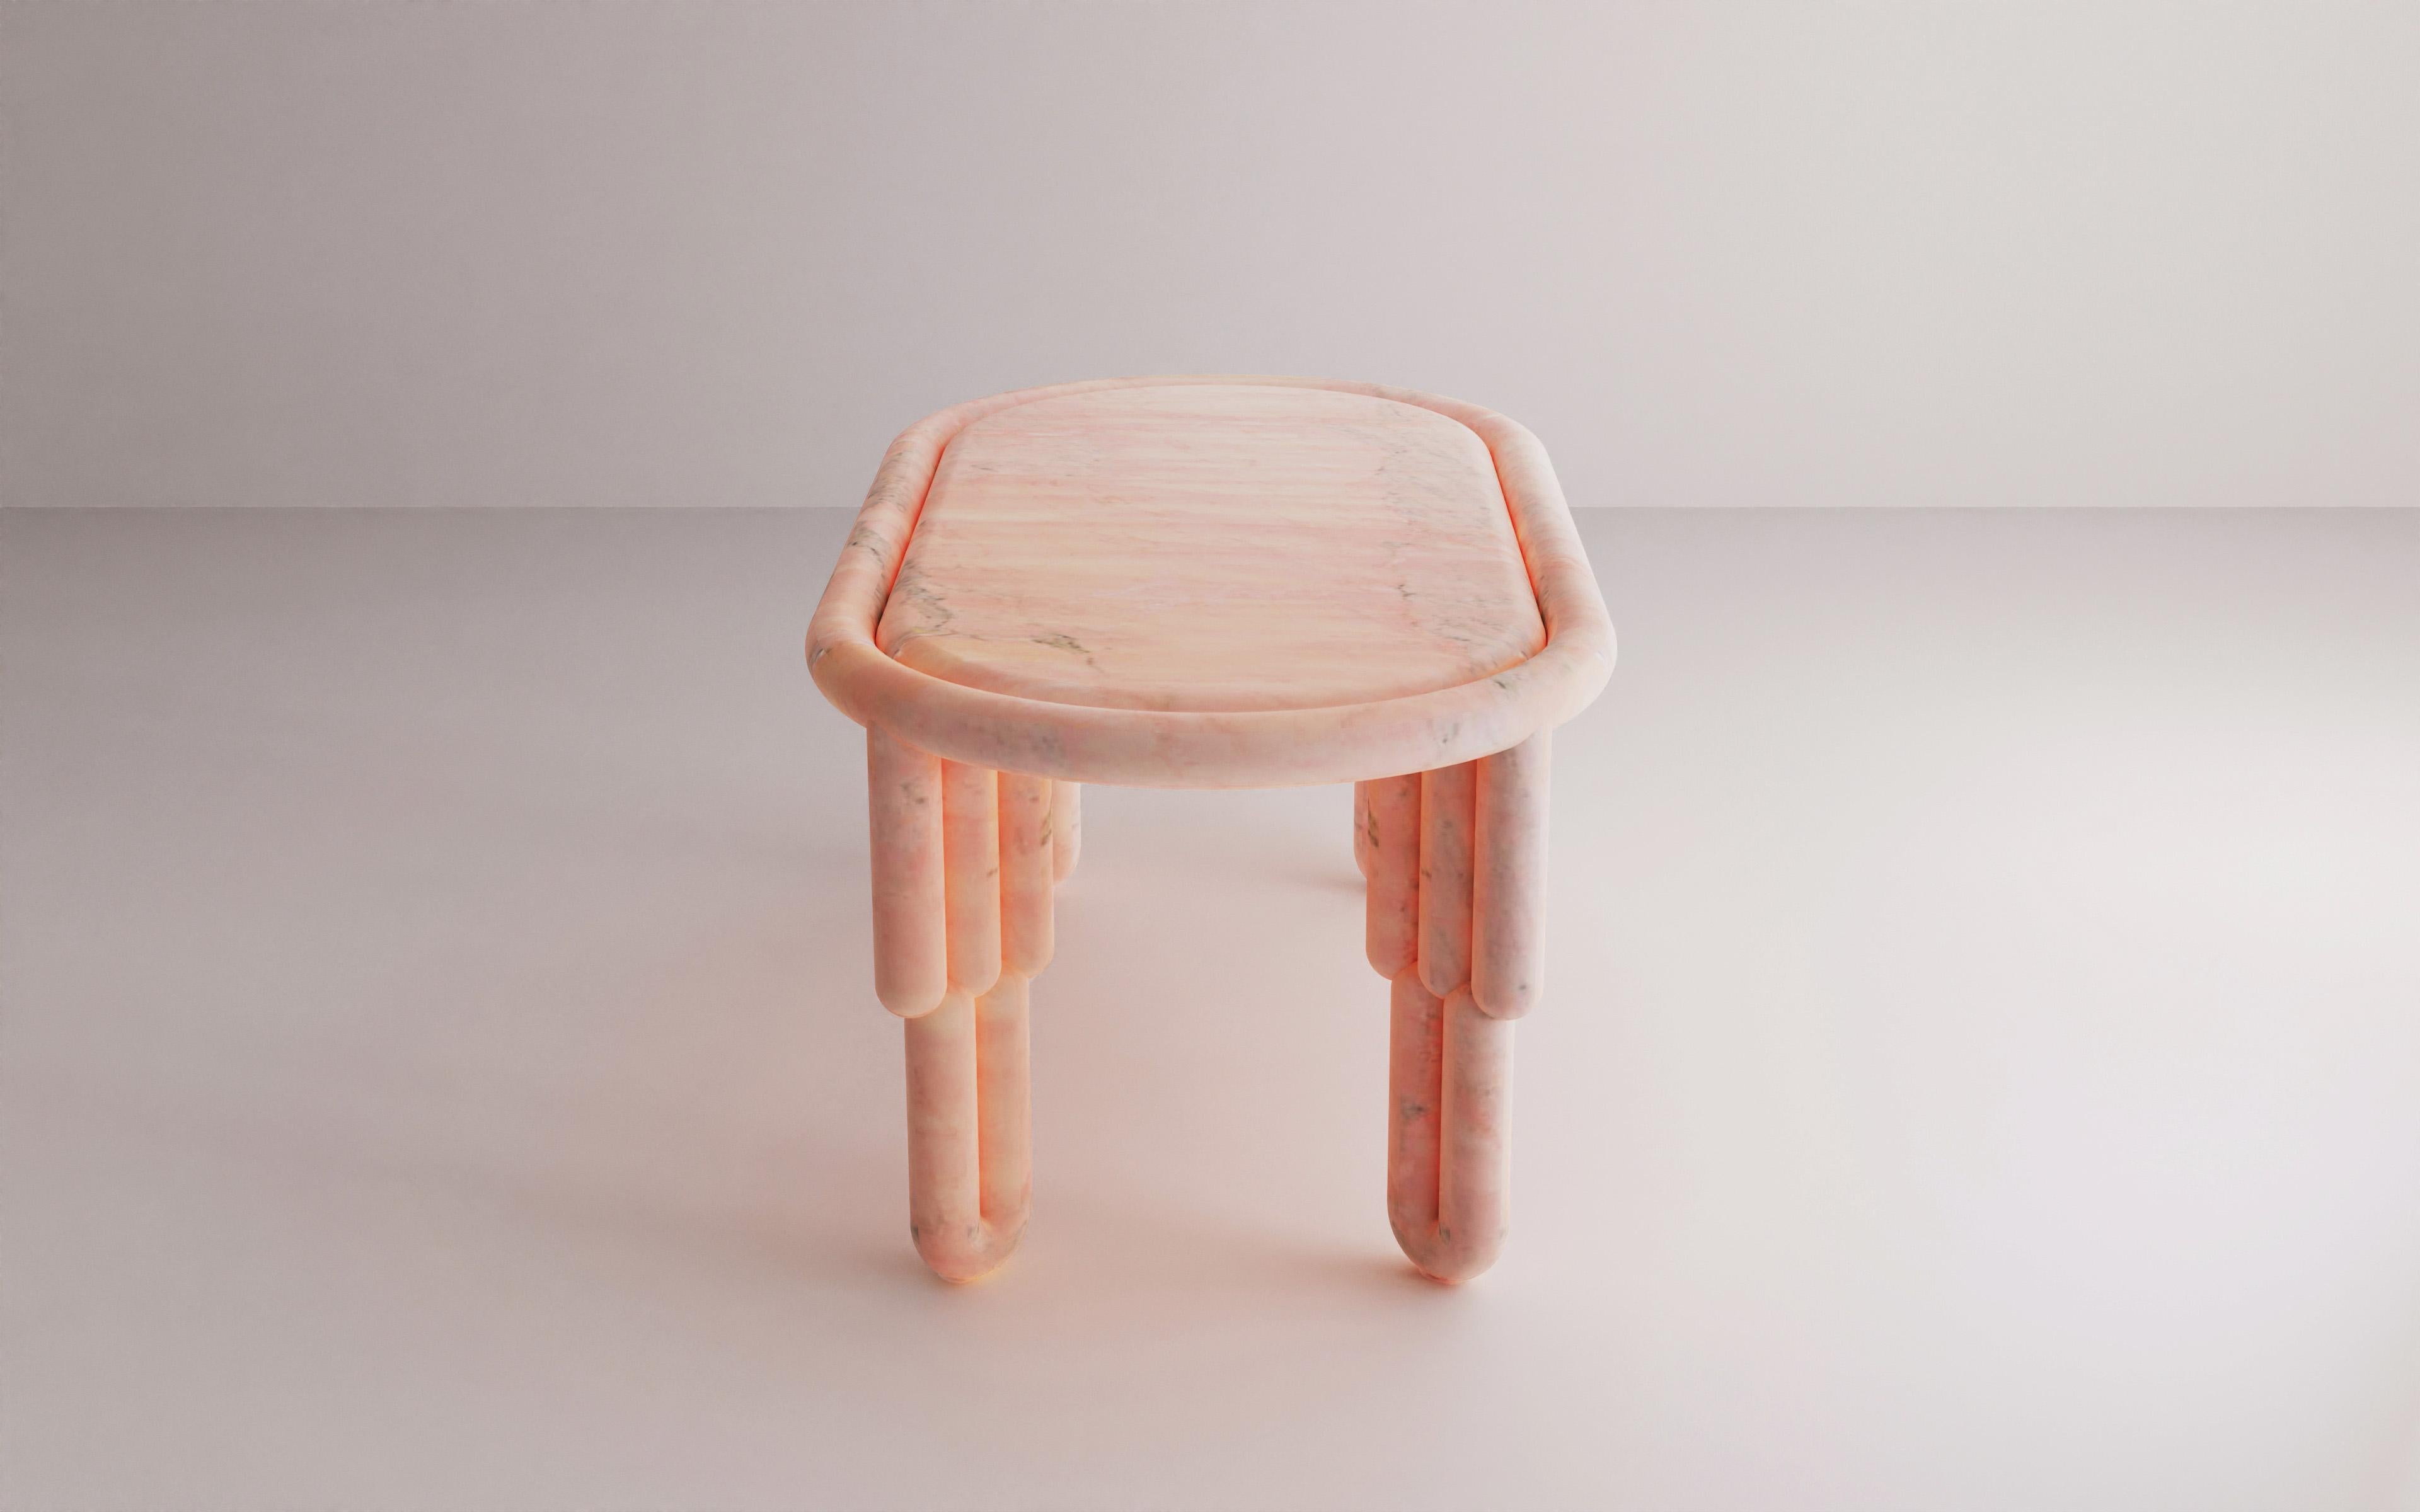 Portuguese Sculptural Kipferl Dining Table by Lara Bohinc in Rosa Portugalo Marble For Sale